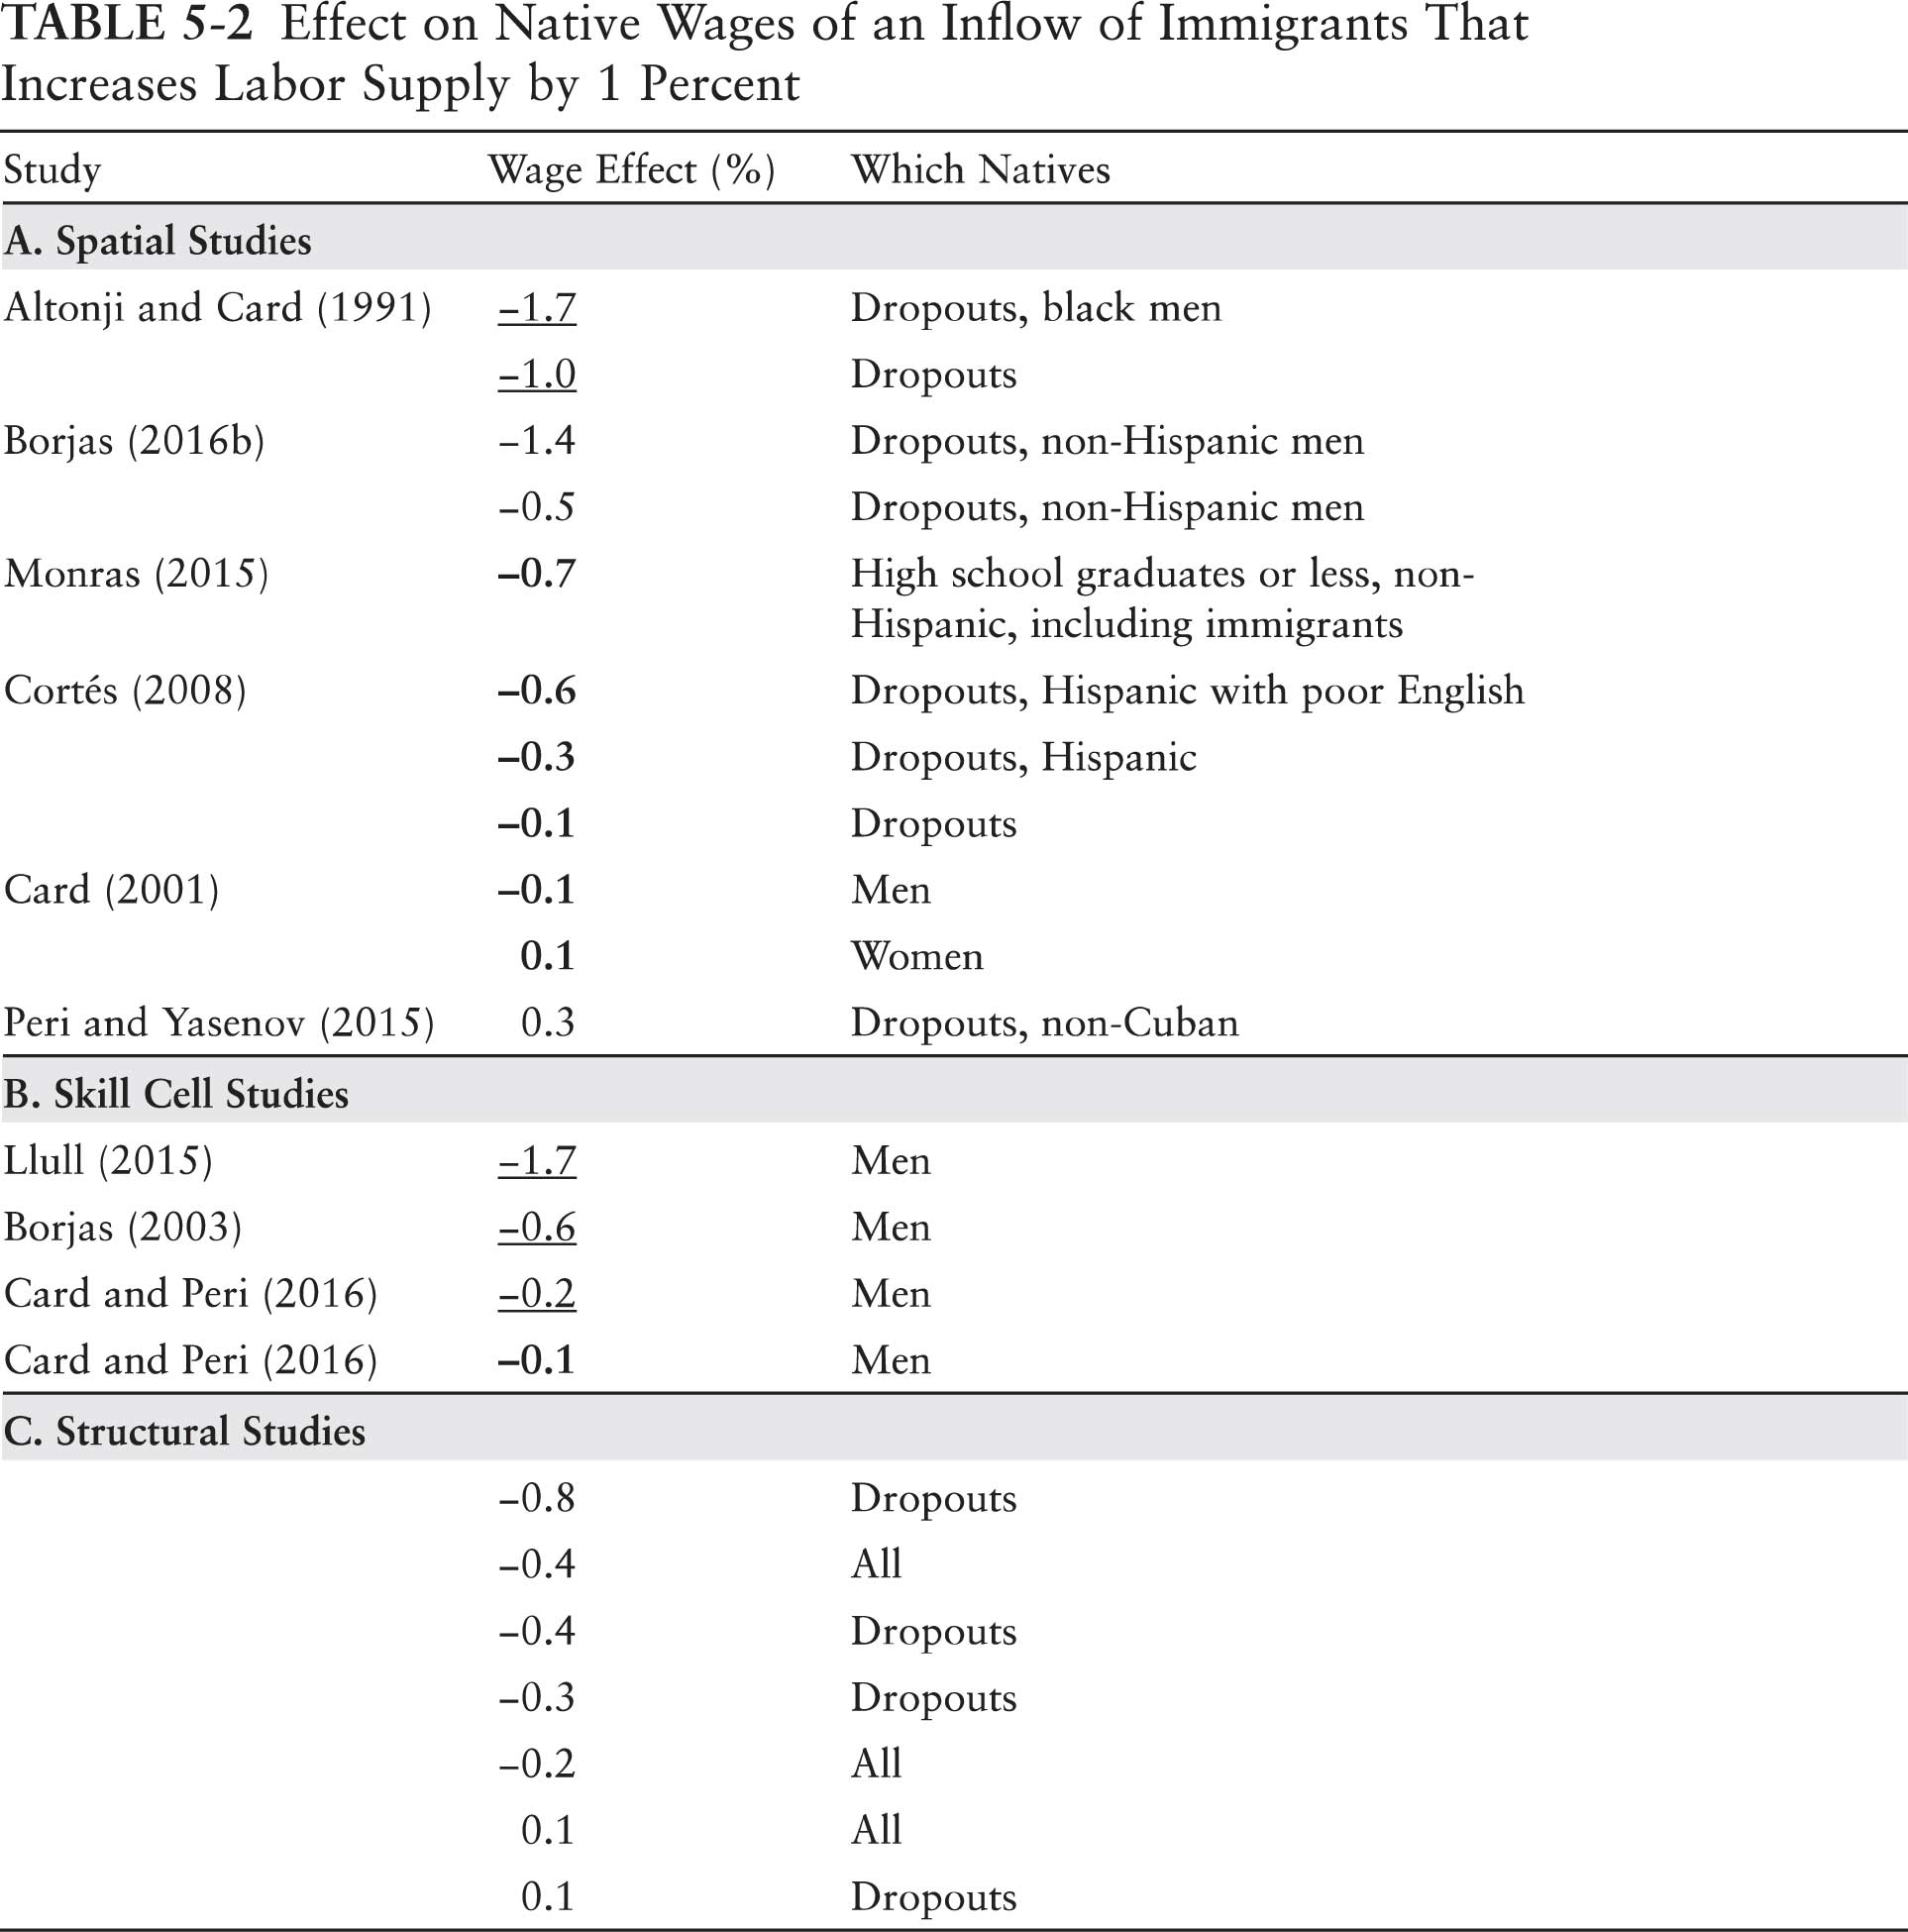 Table: Effect of Native Wages of an Inflow of Immigrants That Increases Labor Supply by 1%